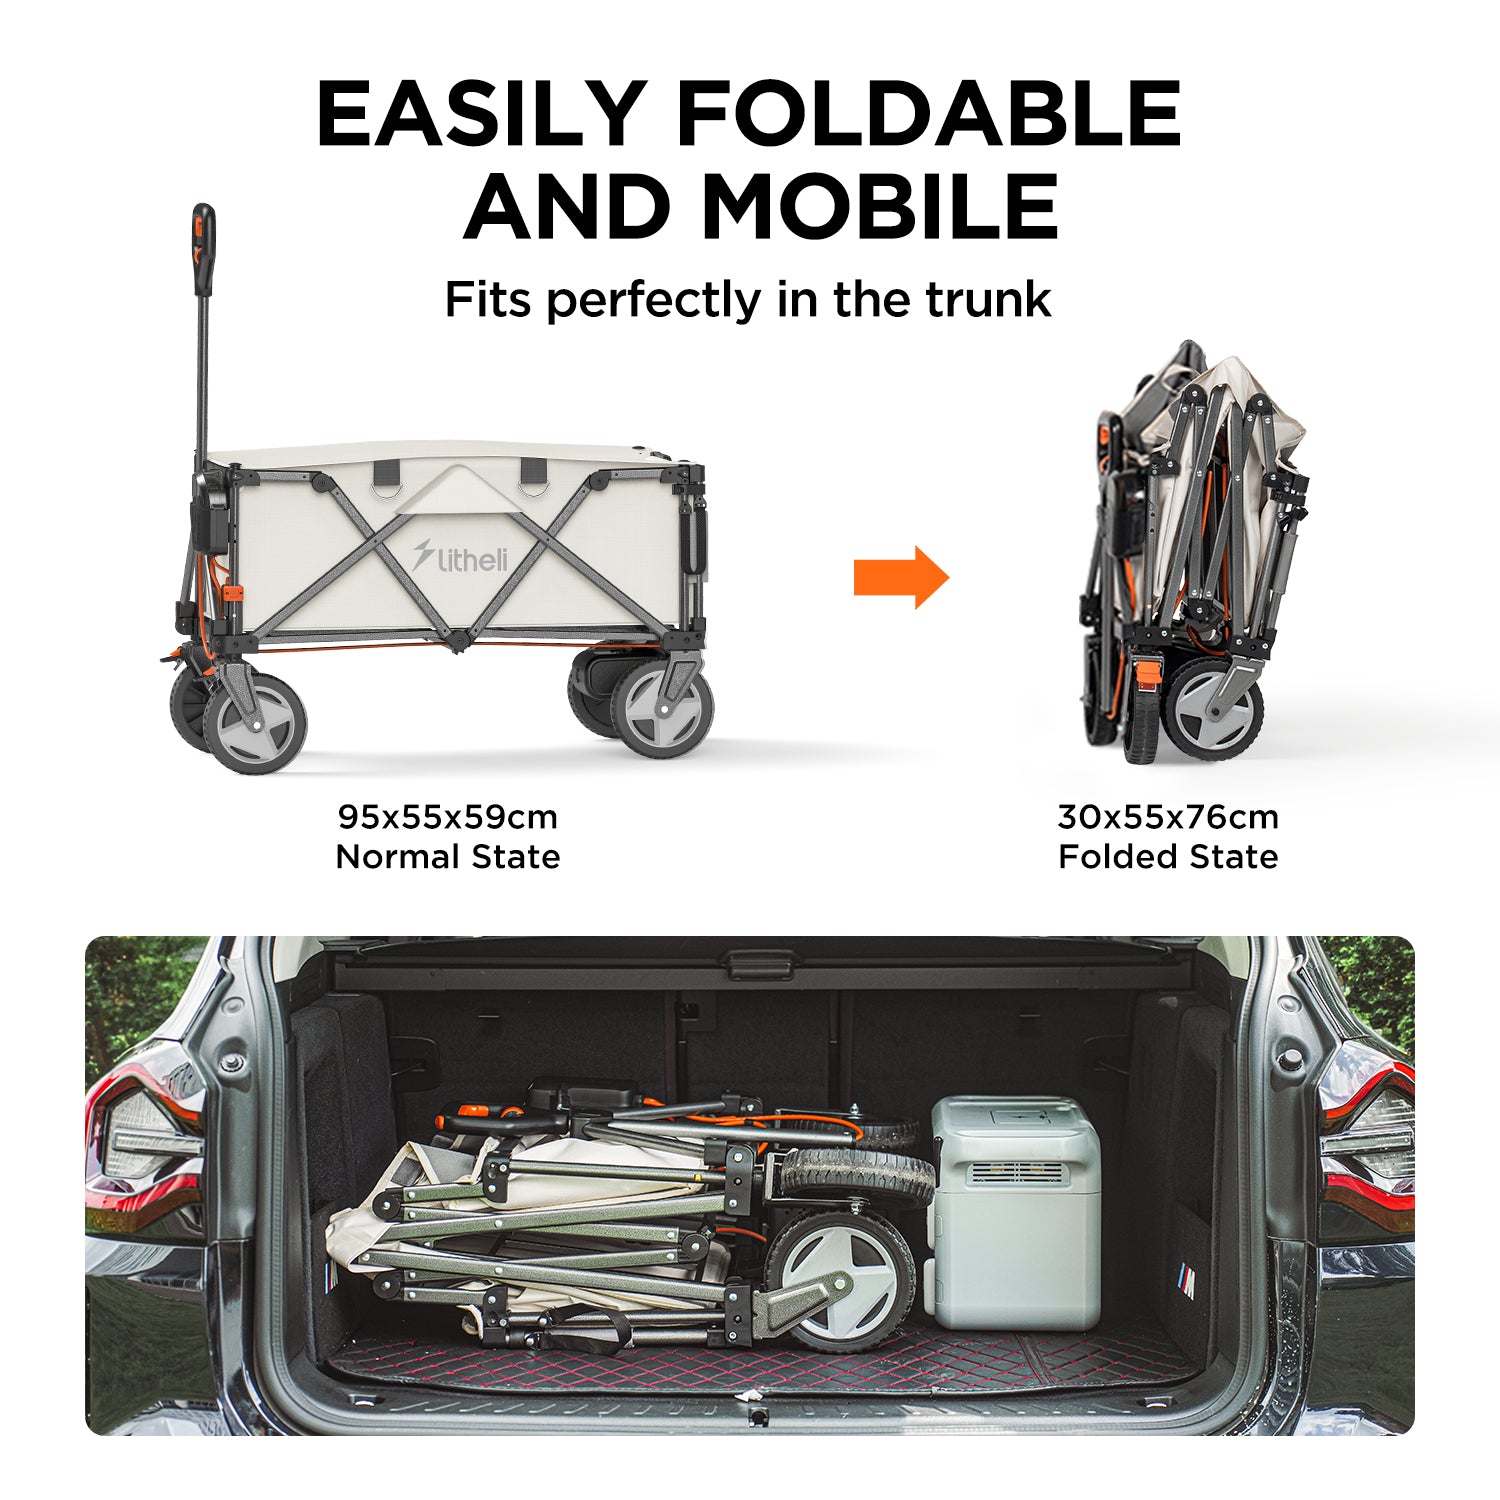 Litheli Electric Foldable Utility Camping Wagon with Power Bank